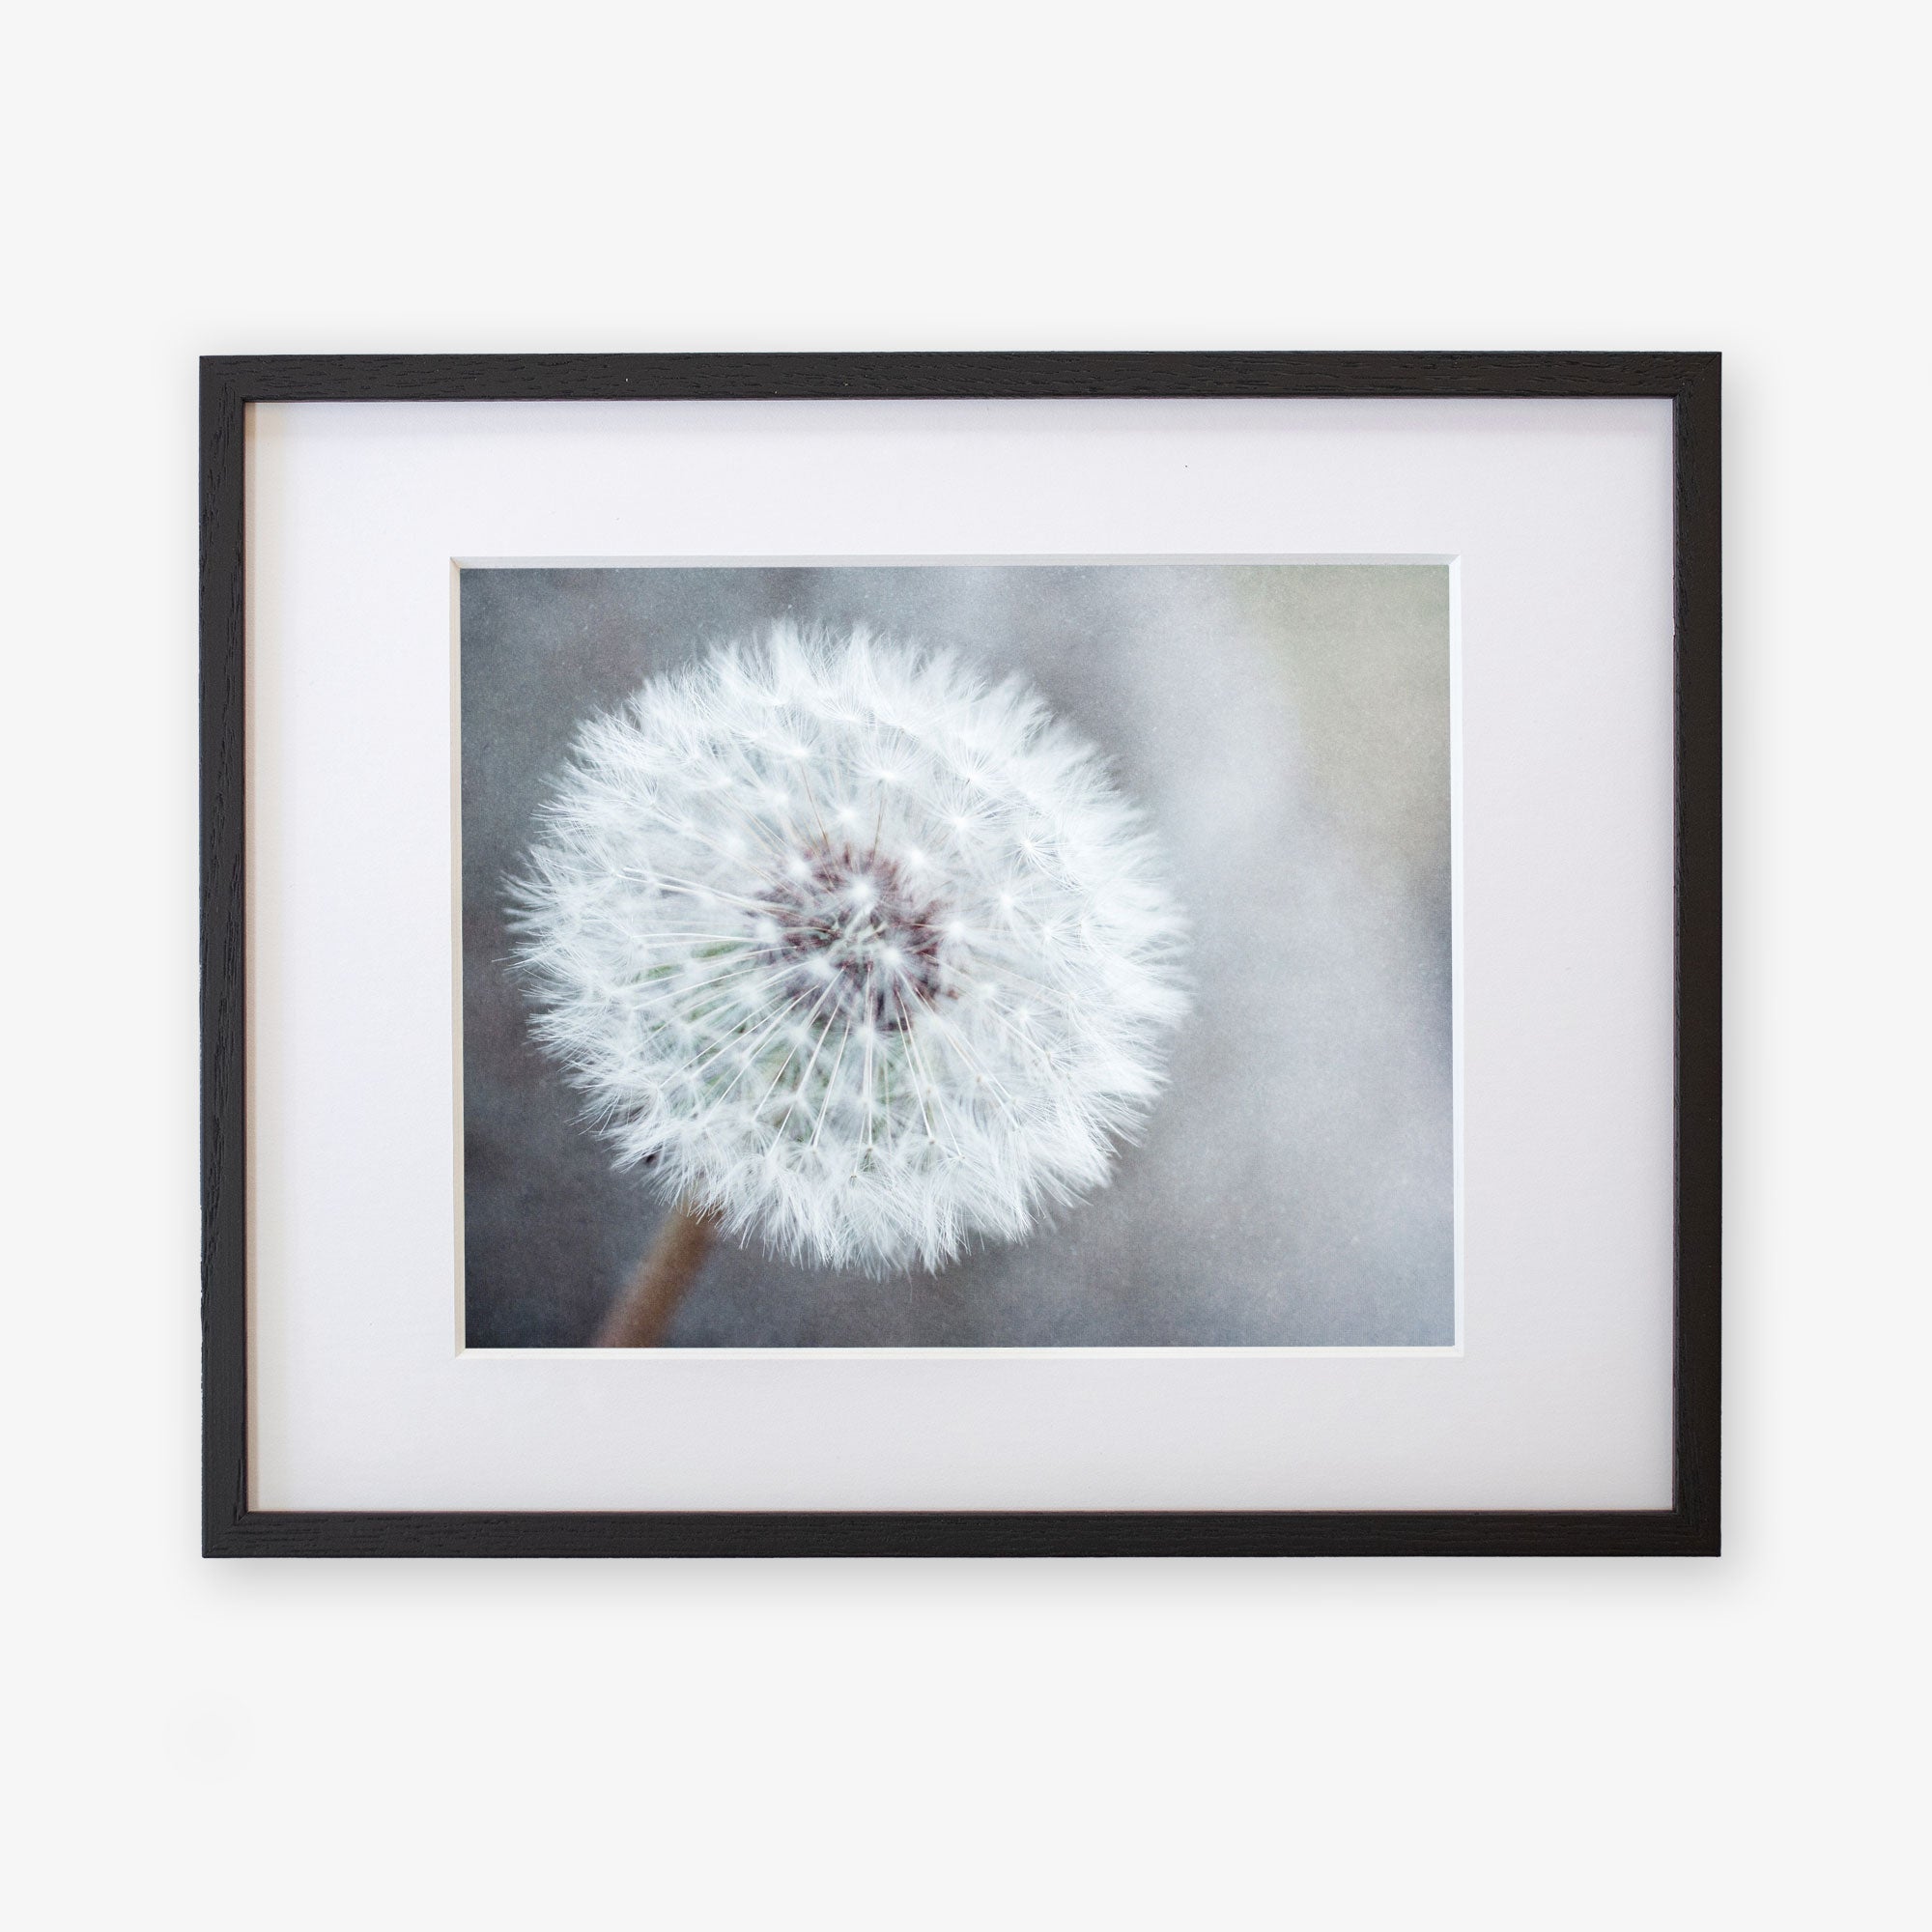 A framed photograph of a close-up view of a Neutral Grey Floral Print, &#39;Dandelion King&#39;, printed on archival photographic paper, displaying its delicate white tufts, with a black frame and white matting against a light Offley Green.